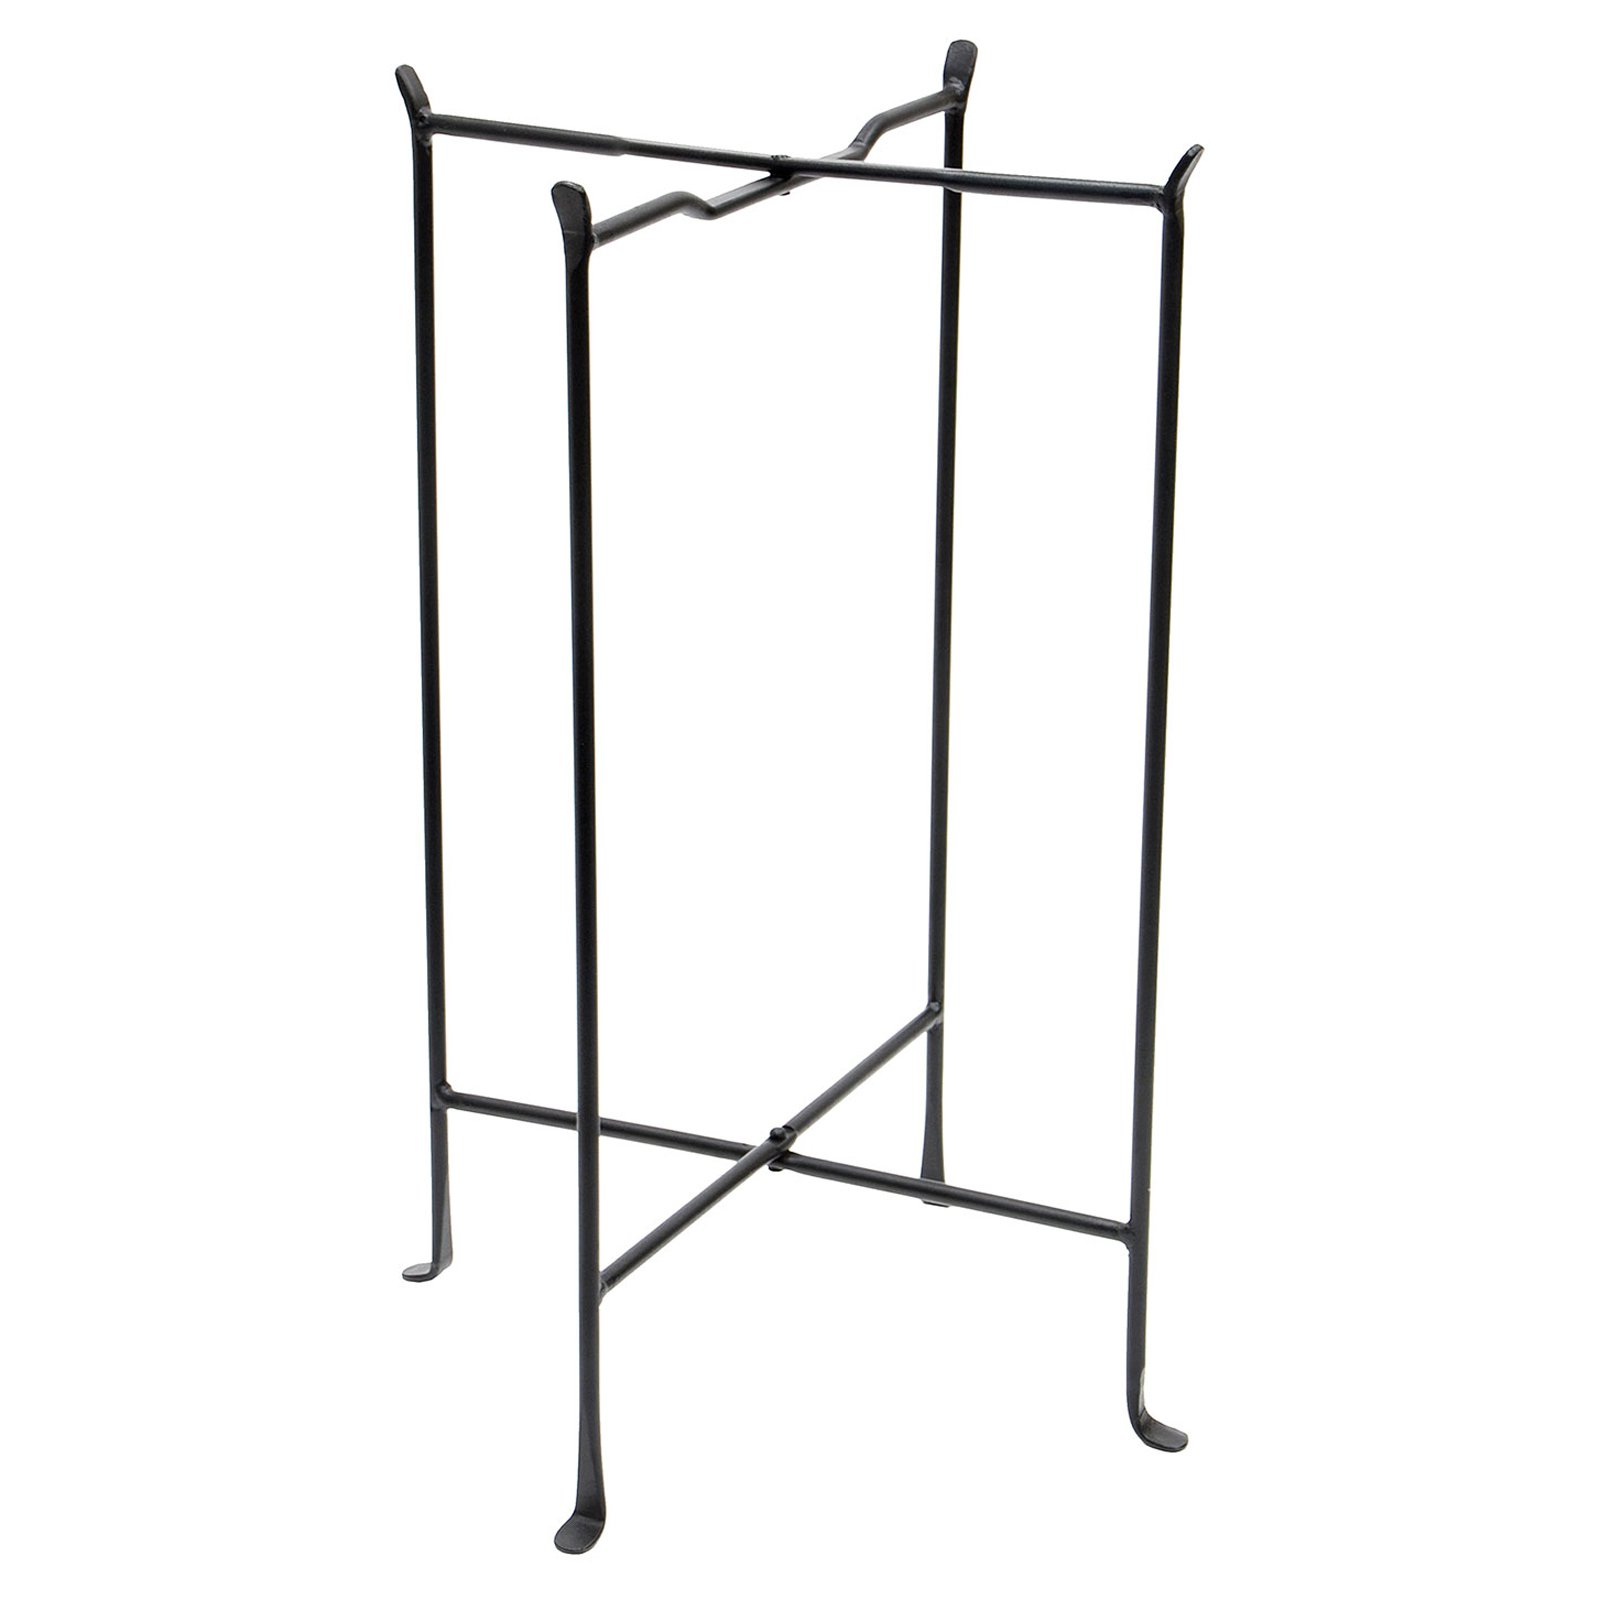 Achla Designs Tall Folding Plant Stand, Black, 29"H - image 1 of 4